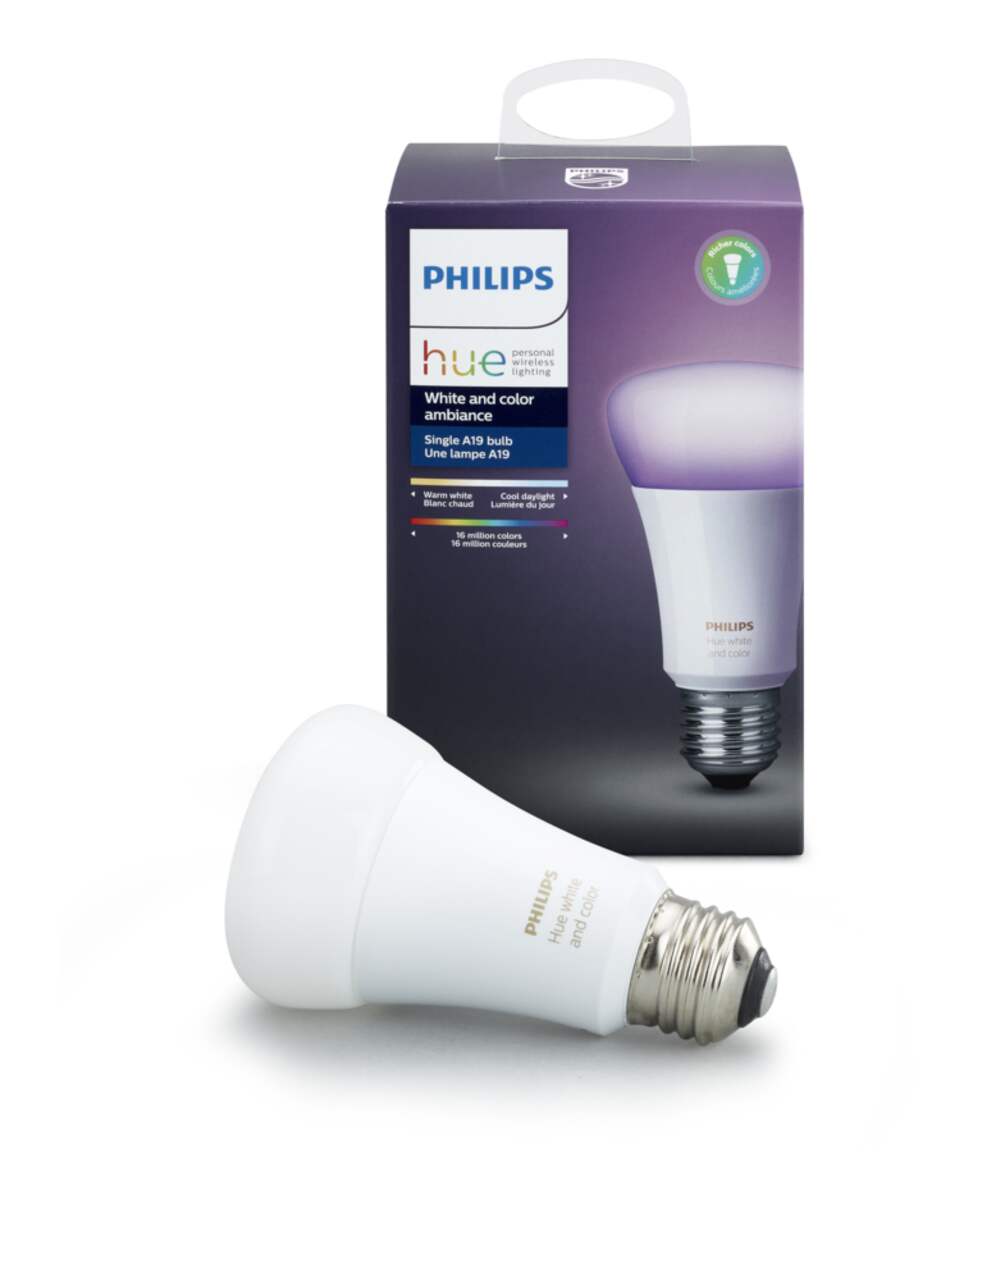 Philips Hue will no longer make the triangle- and globe-shaped